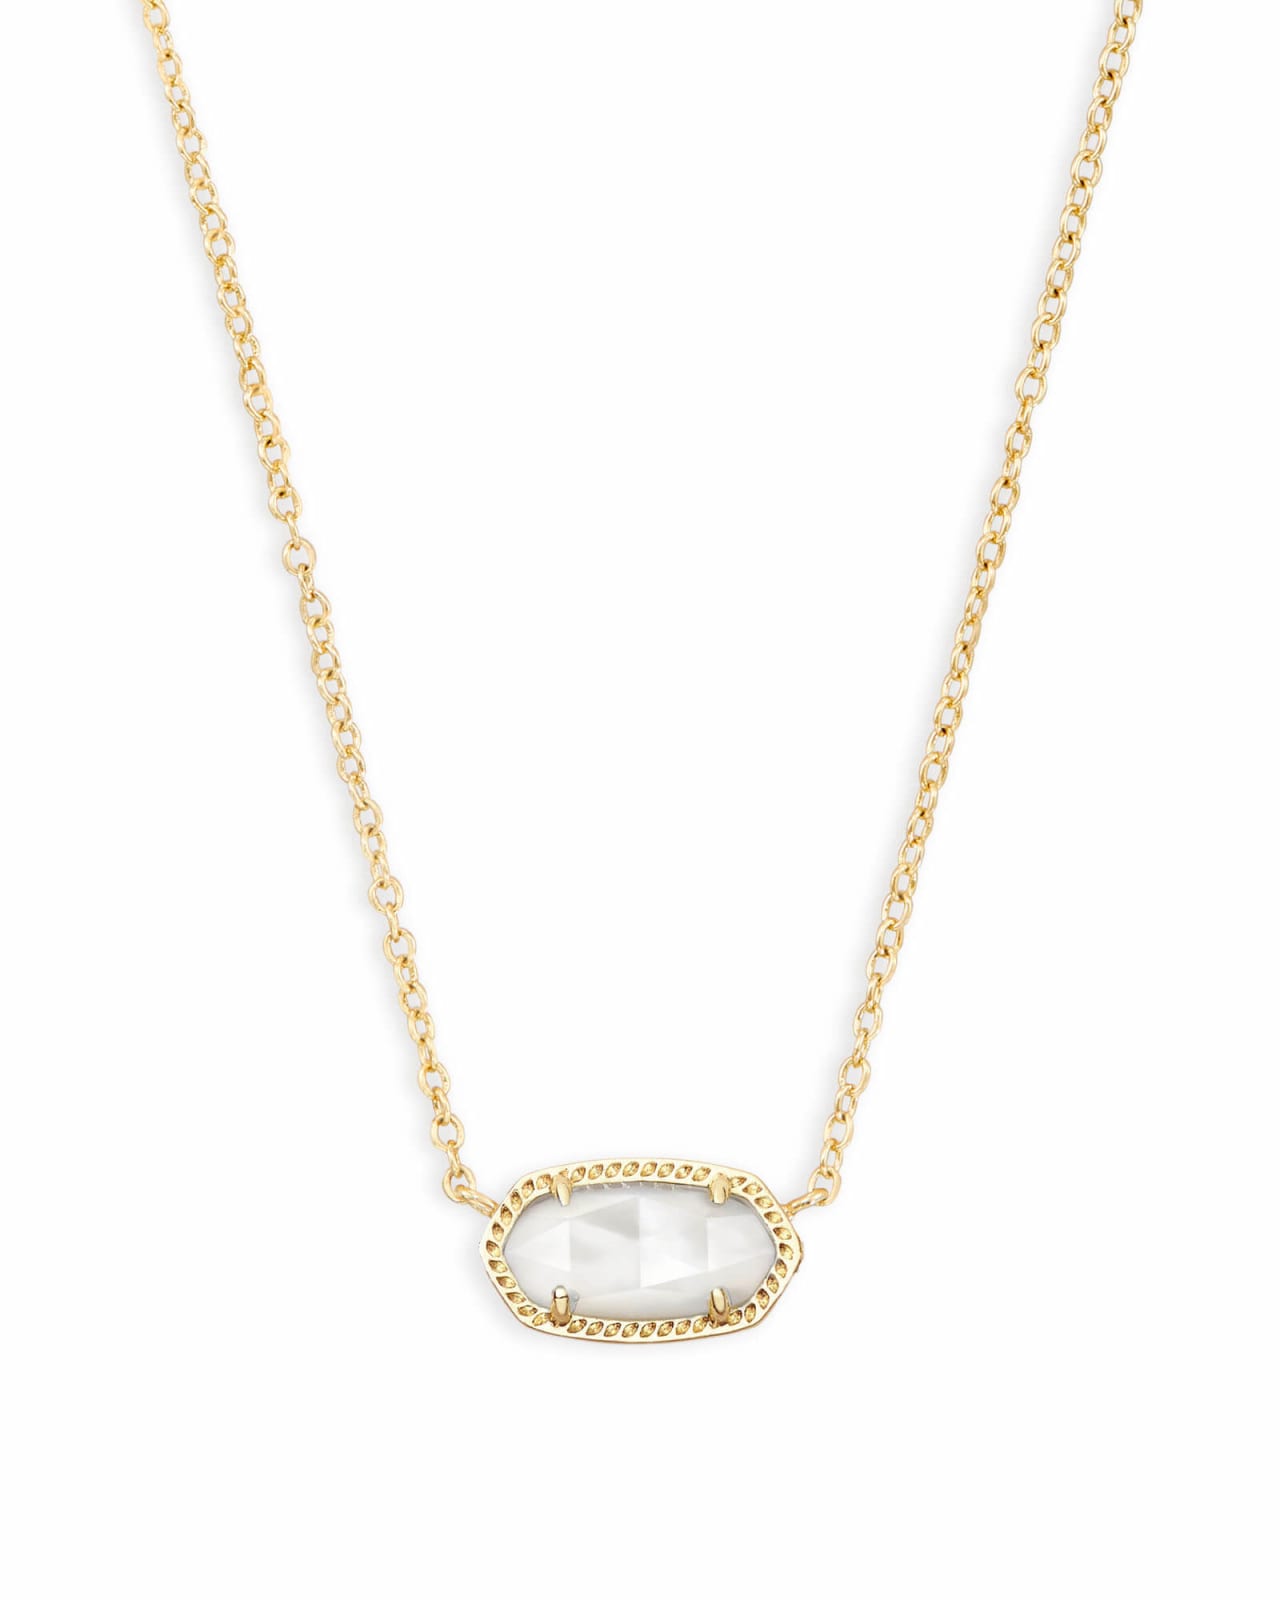 Elisa Gold Extended Length Pendant Necklace in Ivory Mother-of-Pearl | Kendra Scott